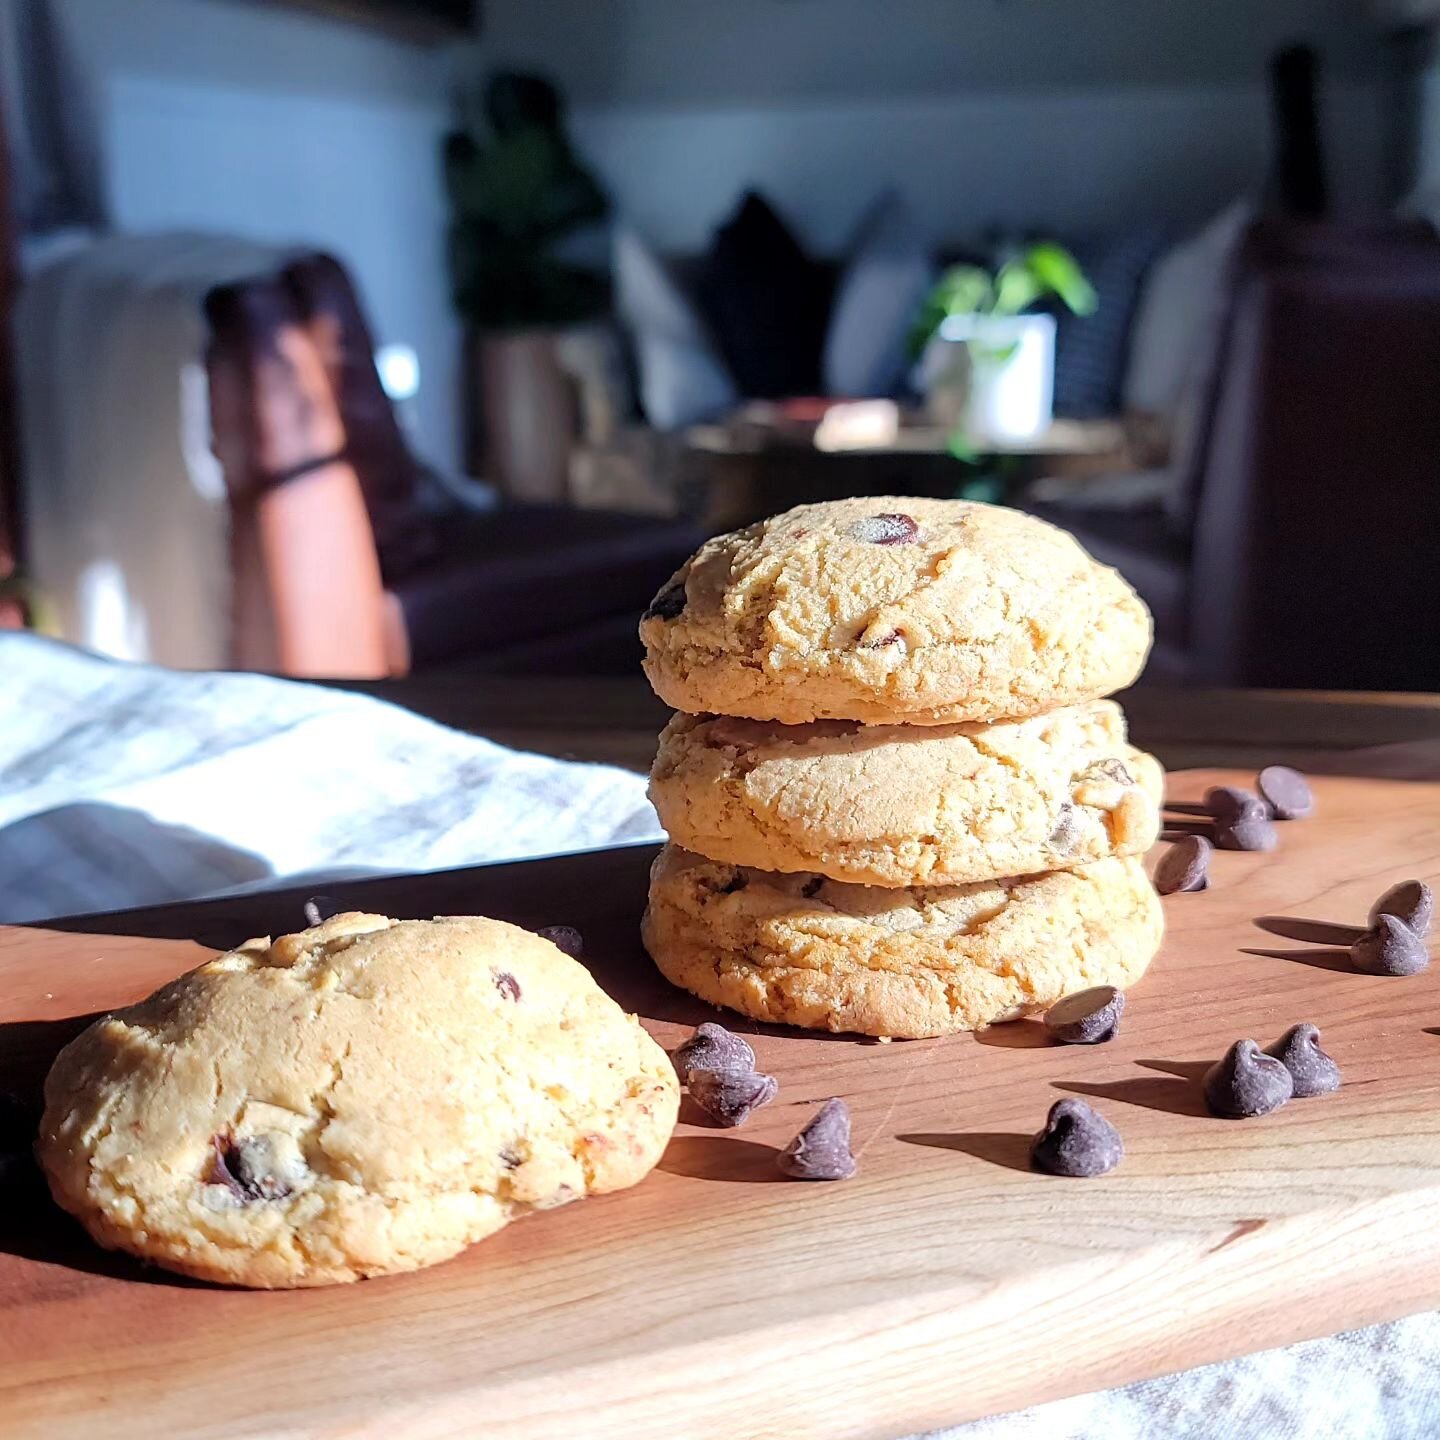 🍪Soft and Chewy Chocolate Chip Cookies🍪

You can NEVER go wrong with a good Chocolate Chip Cookie! Crunchy on the Edges and Soft and Chewy in the Center🙌&hearts;️🍪

#chocolatechipcookies
#chocolatechipcookie
#chocolate #chocolatechip #cookiesofin